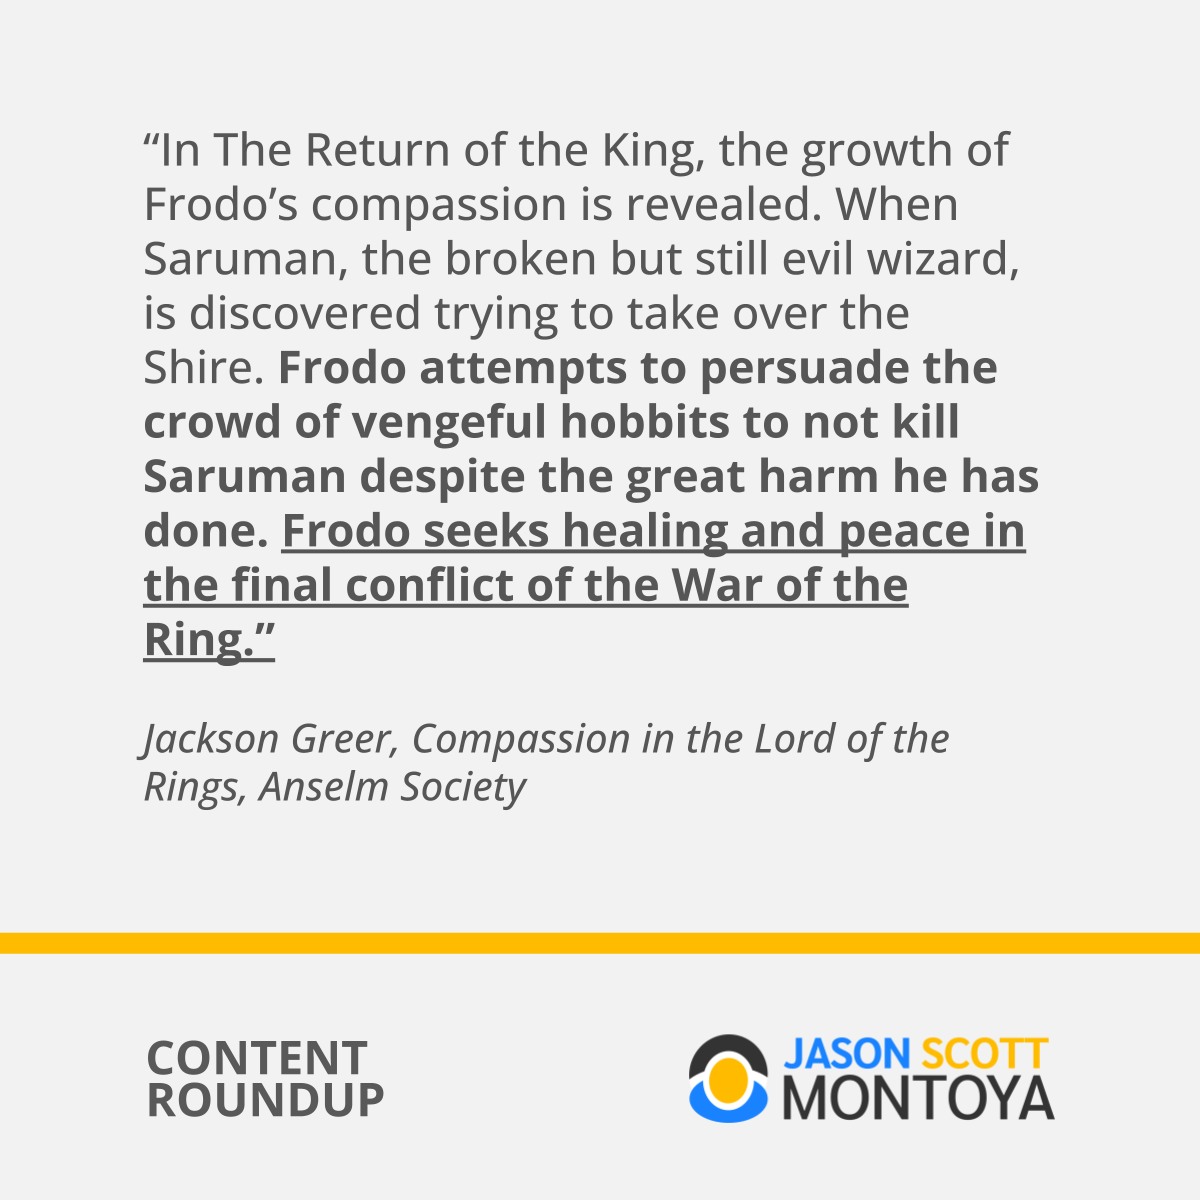 “In The Return of the King, the growth of Frodo’s compassion is revealed. When Saruman, the broken but still evil wizard, is discovered trying to take over the Shire. Frodo attempts to persuade the crowd of vengeful hobbits to not kill Saruman despite the great harm he has done. Frodo seeks healing and peace in the final conflict of the War of the Ring.”  Jackson Greer, Compassion in the Lord of the Rings, Anselm Society